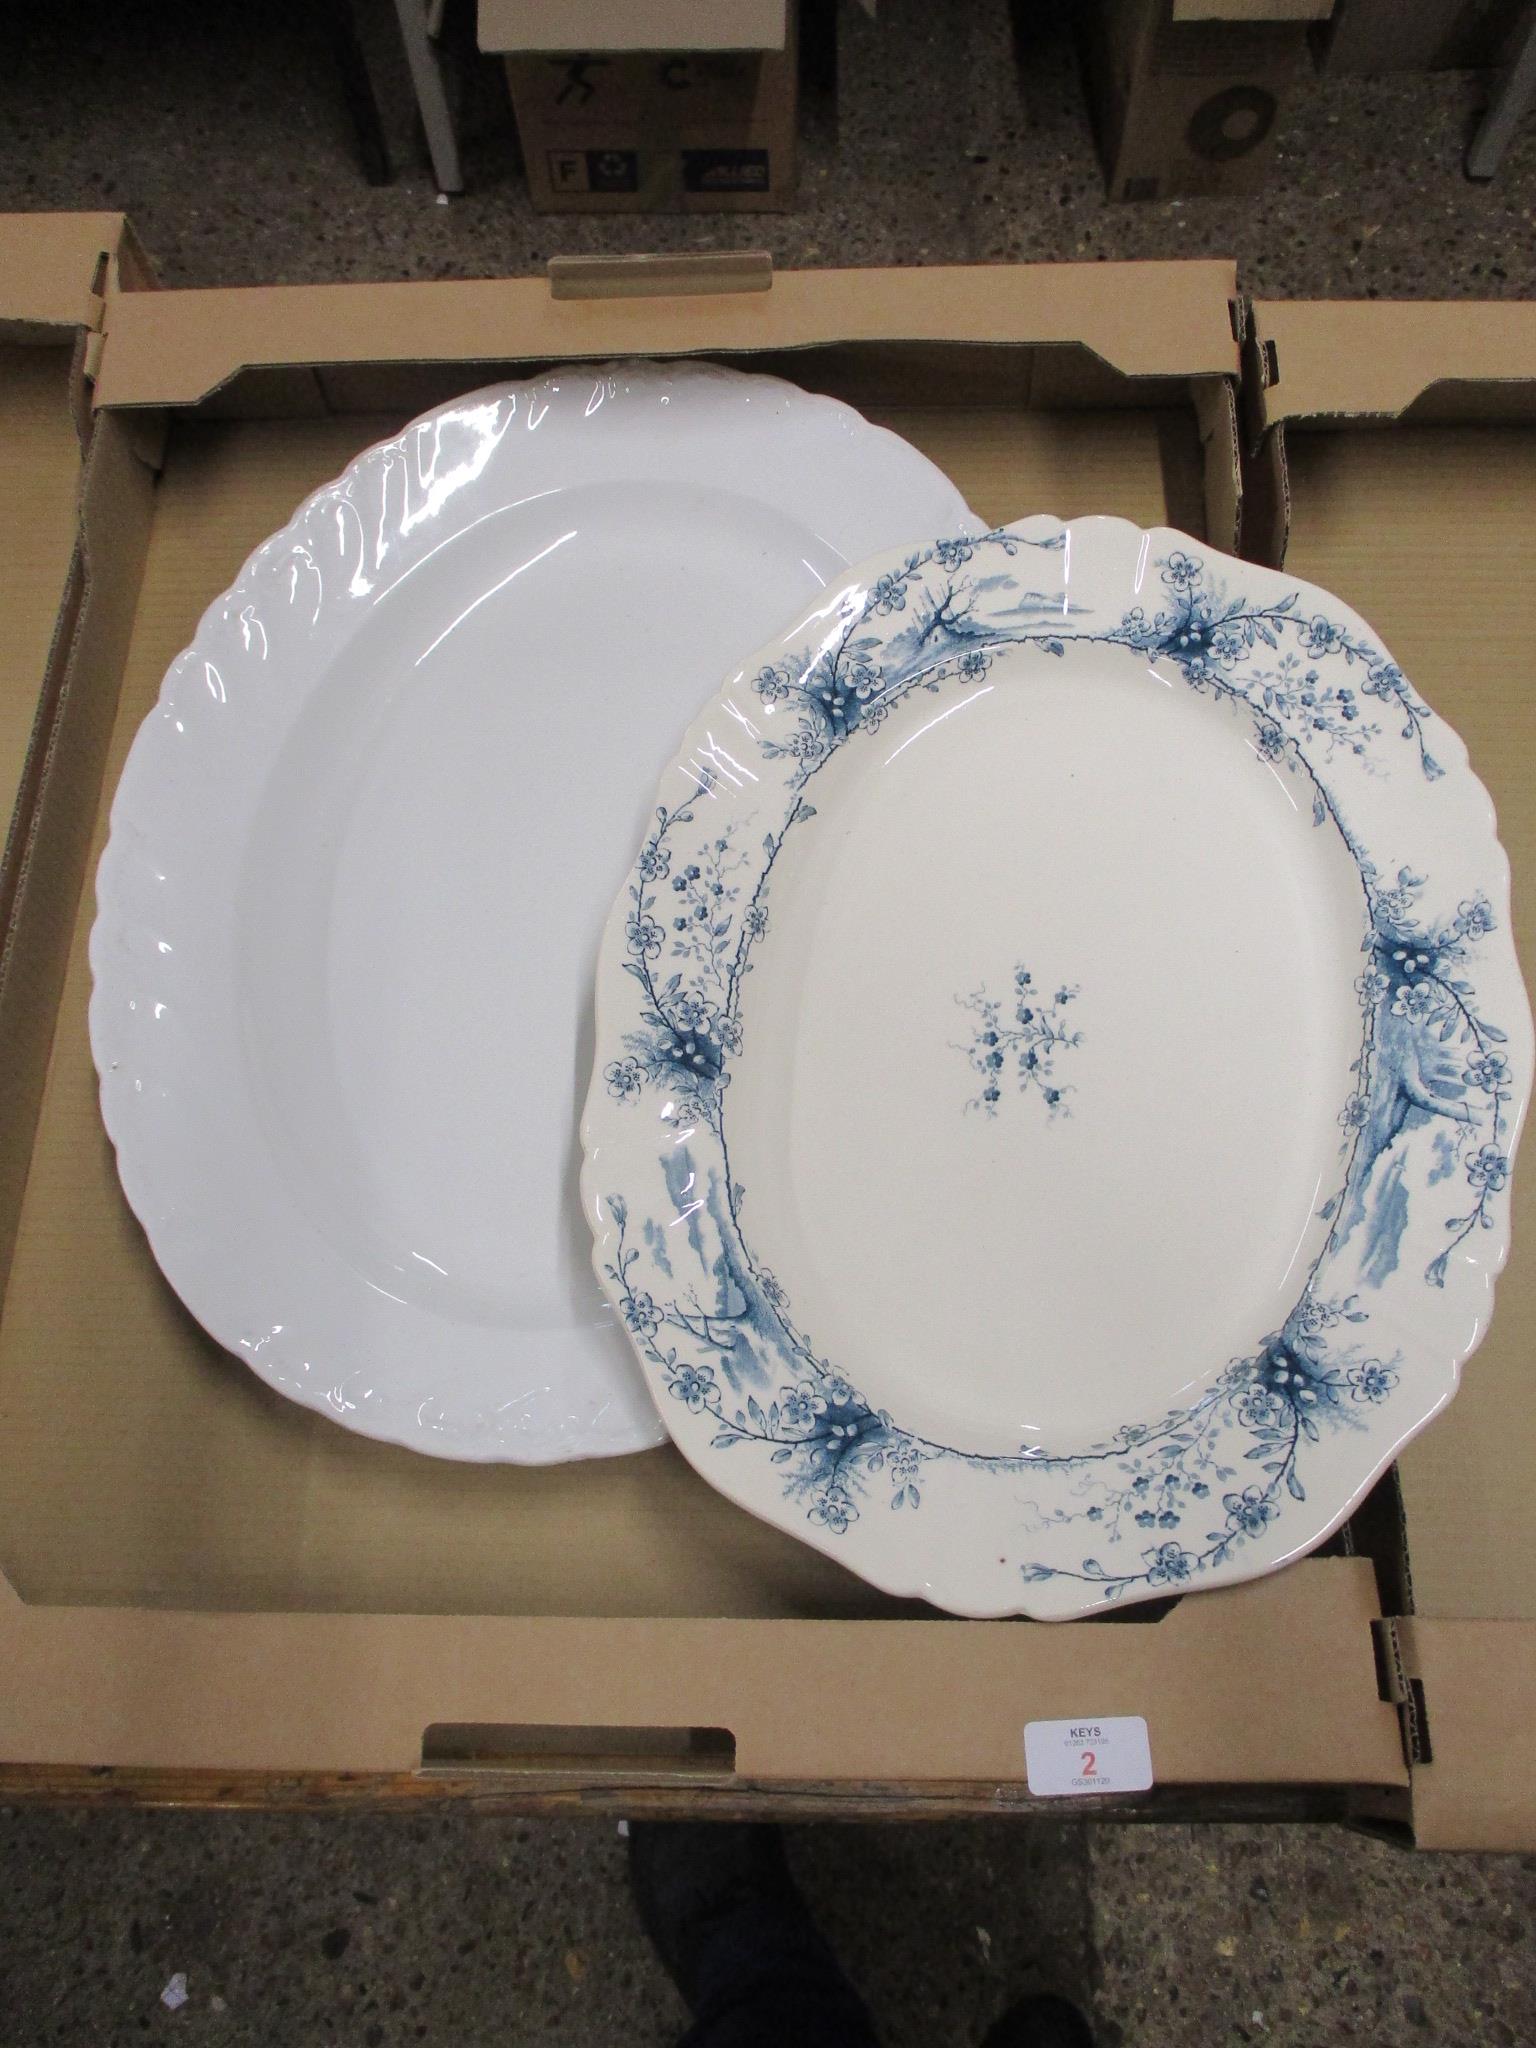 BOX CONTAINING TWO LARGE SERVING DISHES